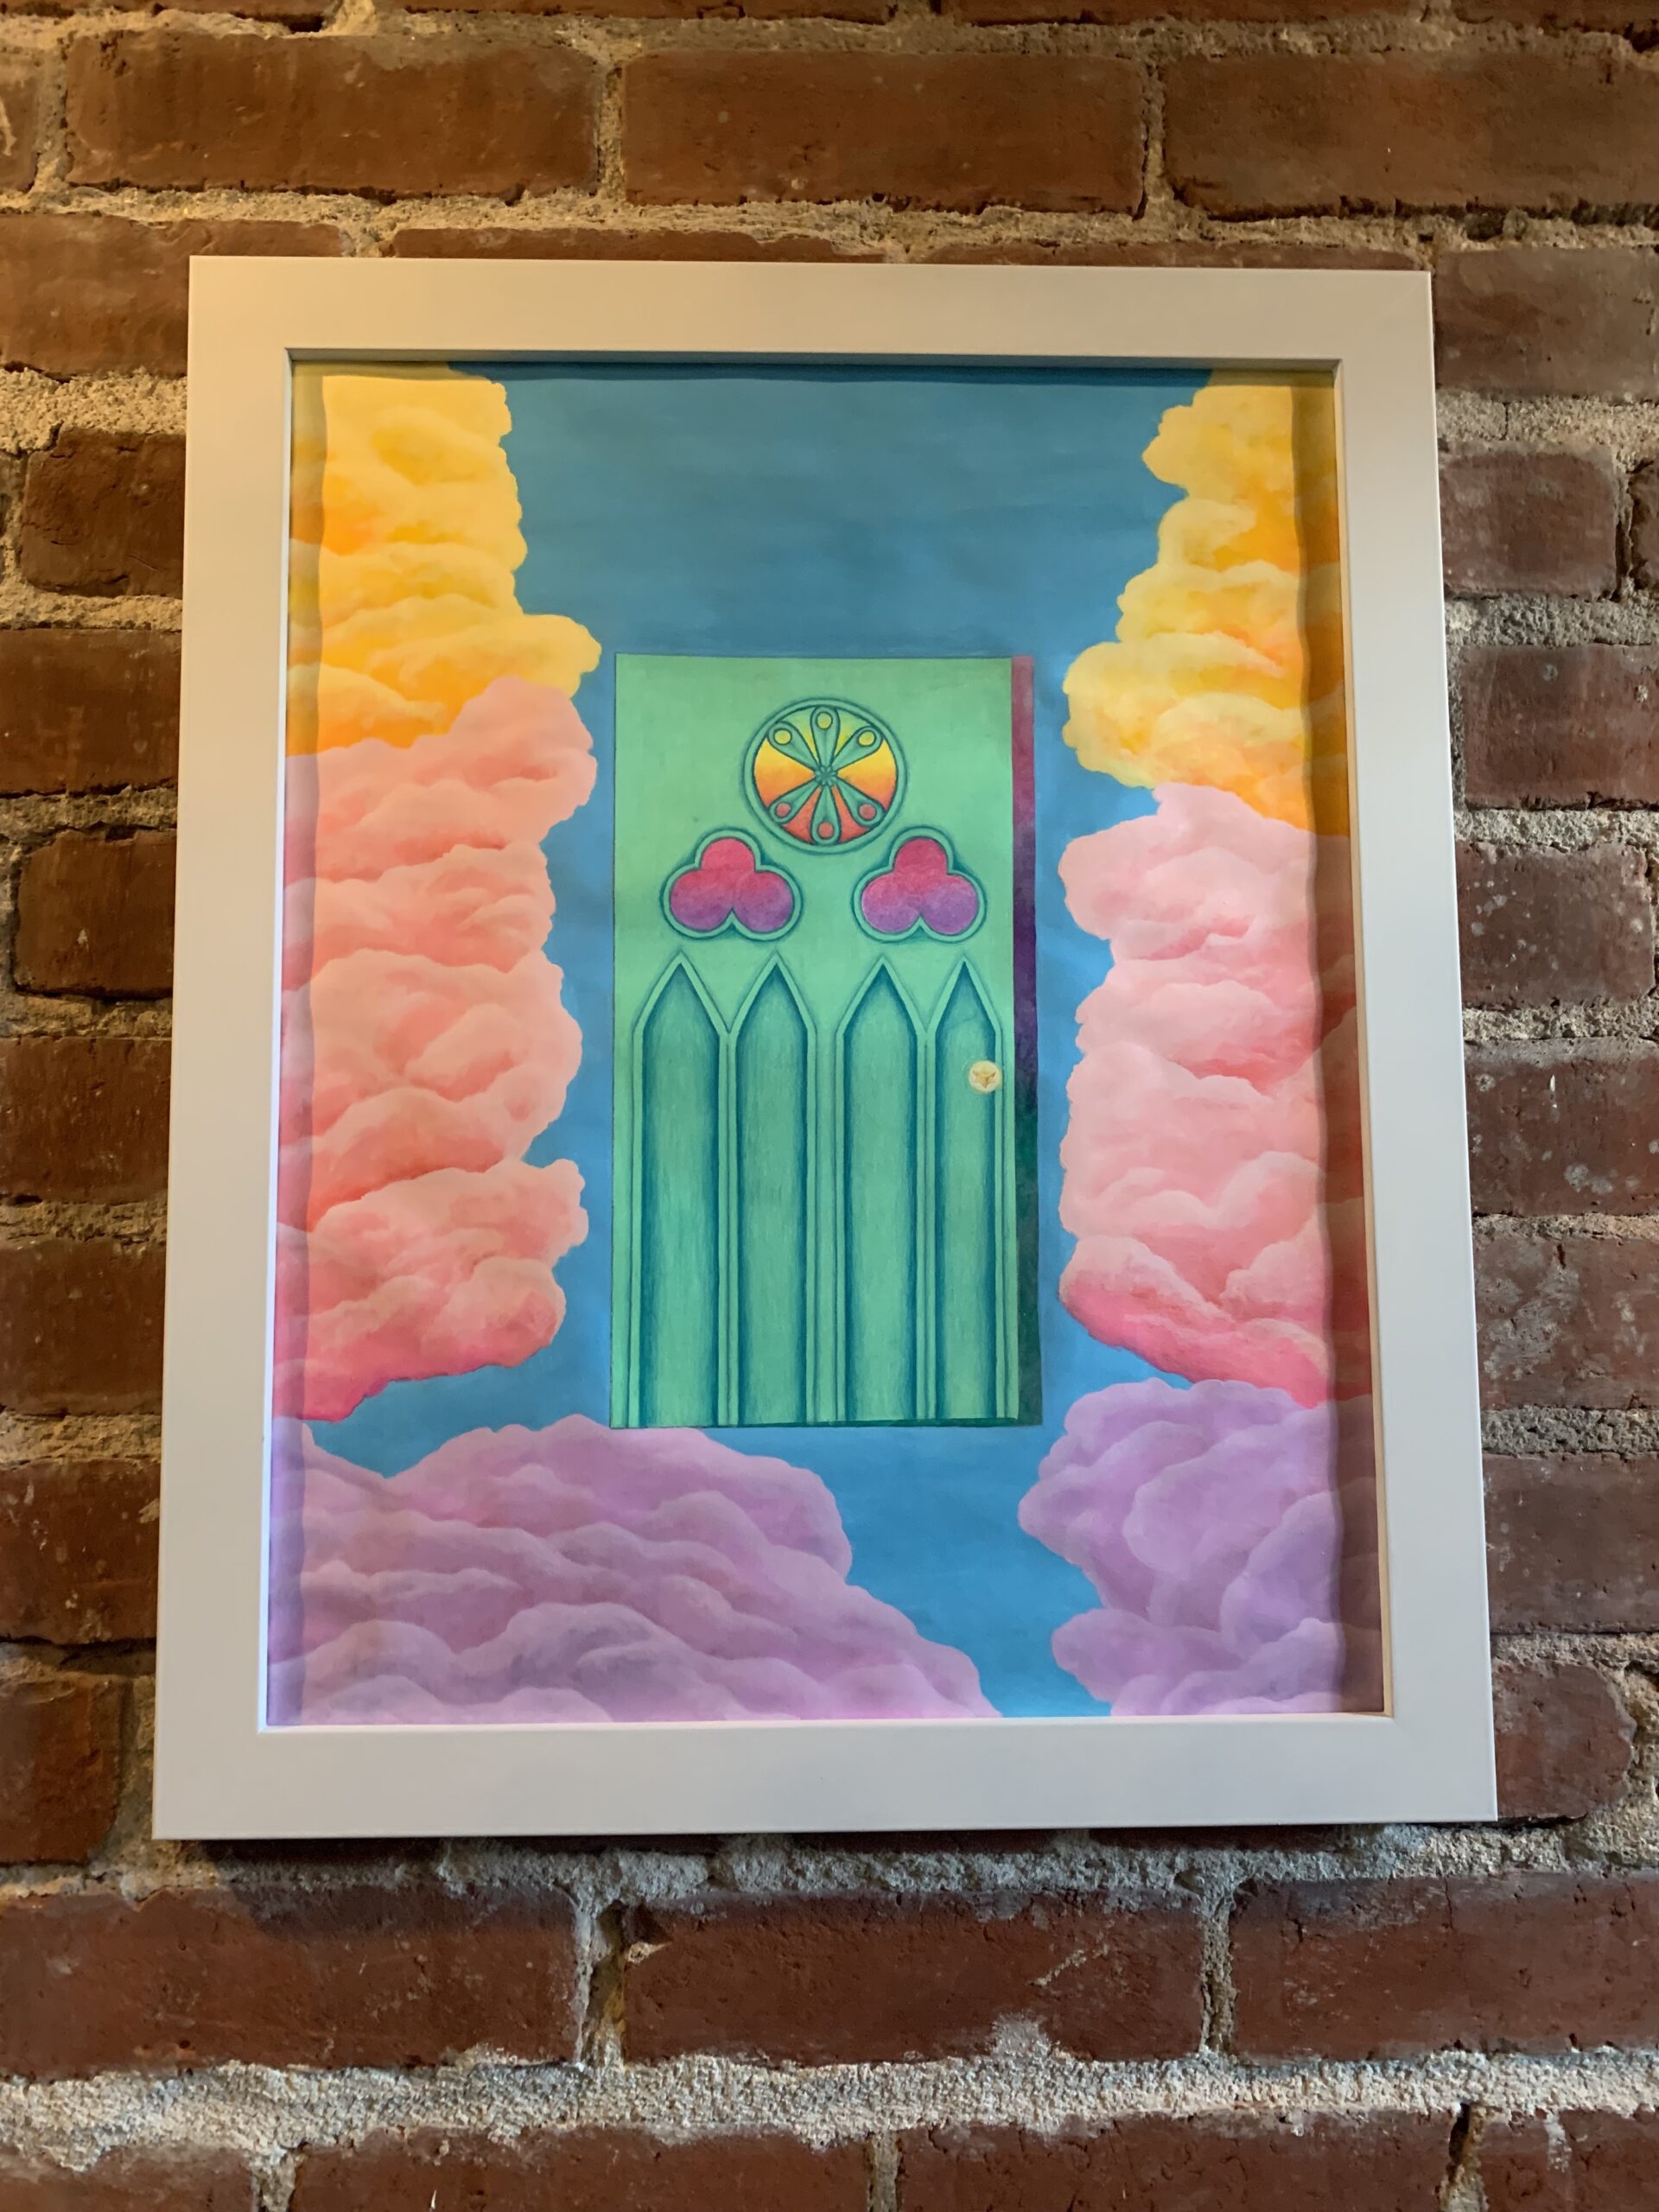 Cotton candy clouds and colorful door